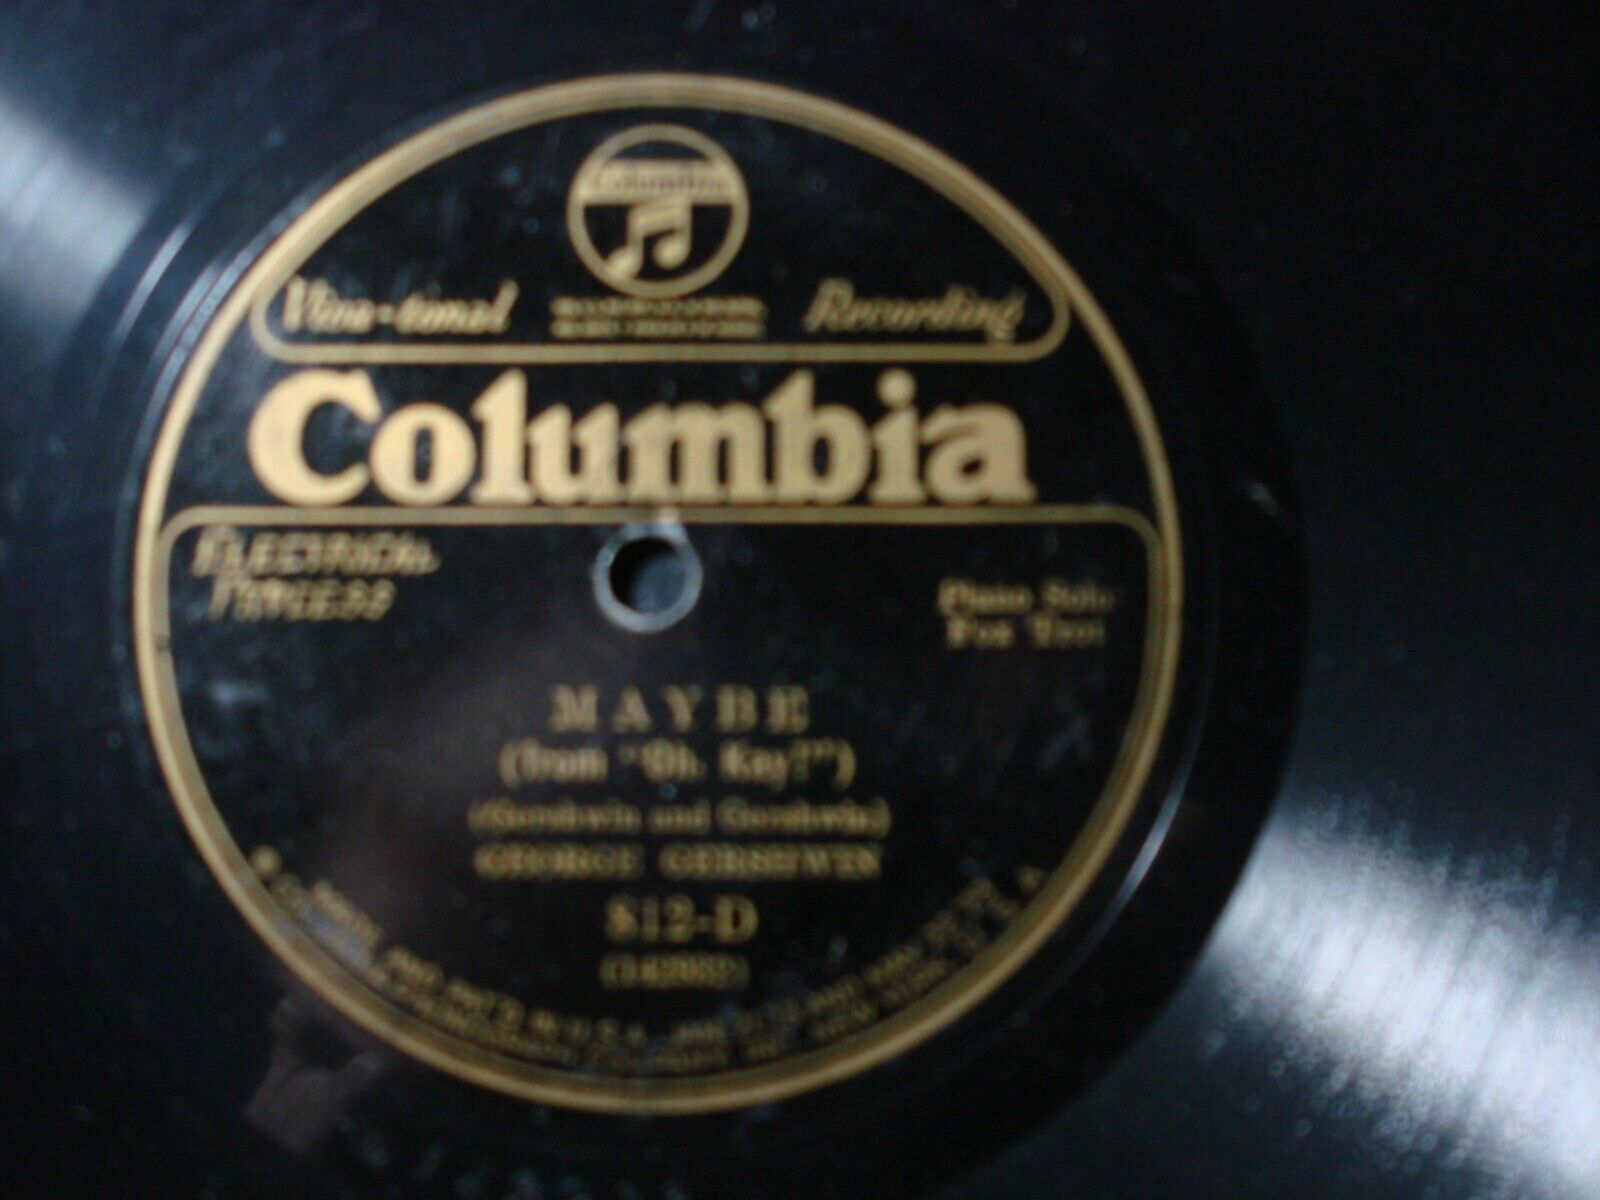 GEORGE GERSHWIN MAYBE 78 RECORD SOMEONE TO WATCH OVER ME COLUMBIA 812